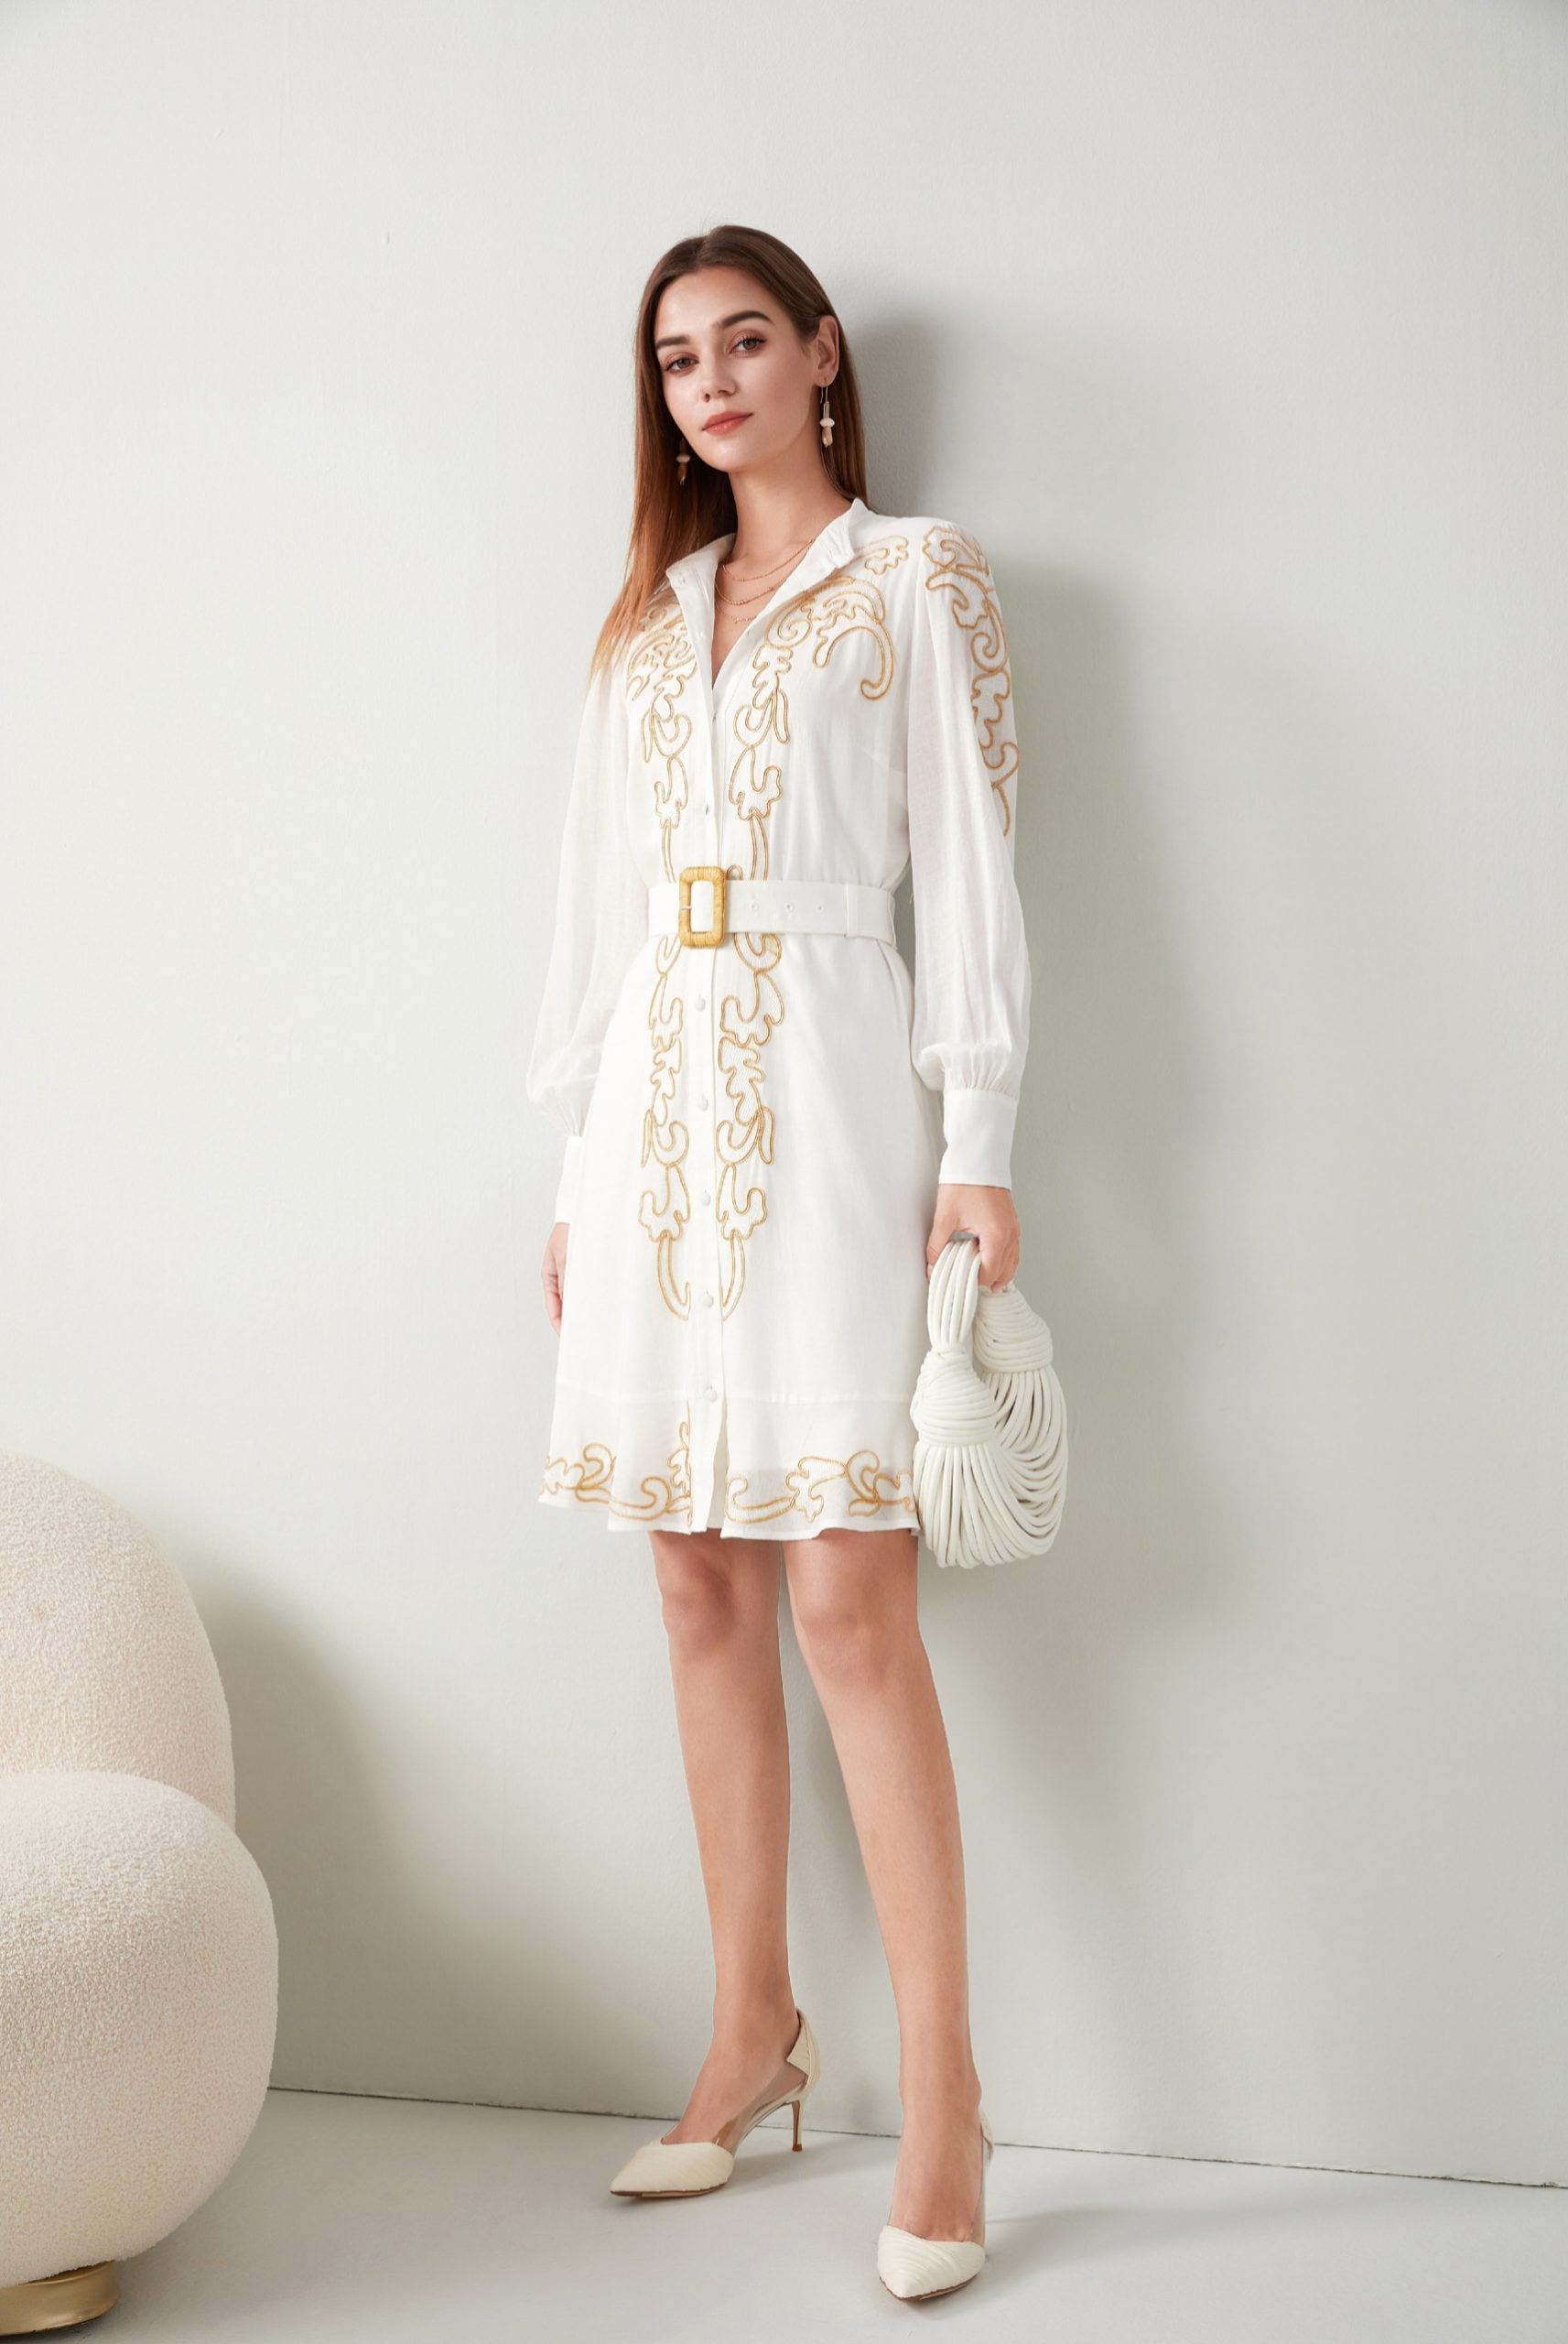 "Effortlessly chic: Short white dress adorned with delicate embroidery. Shop now!"